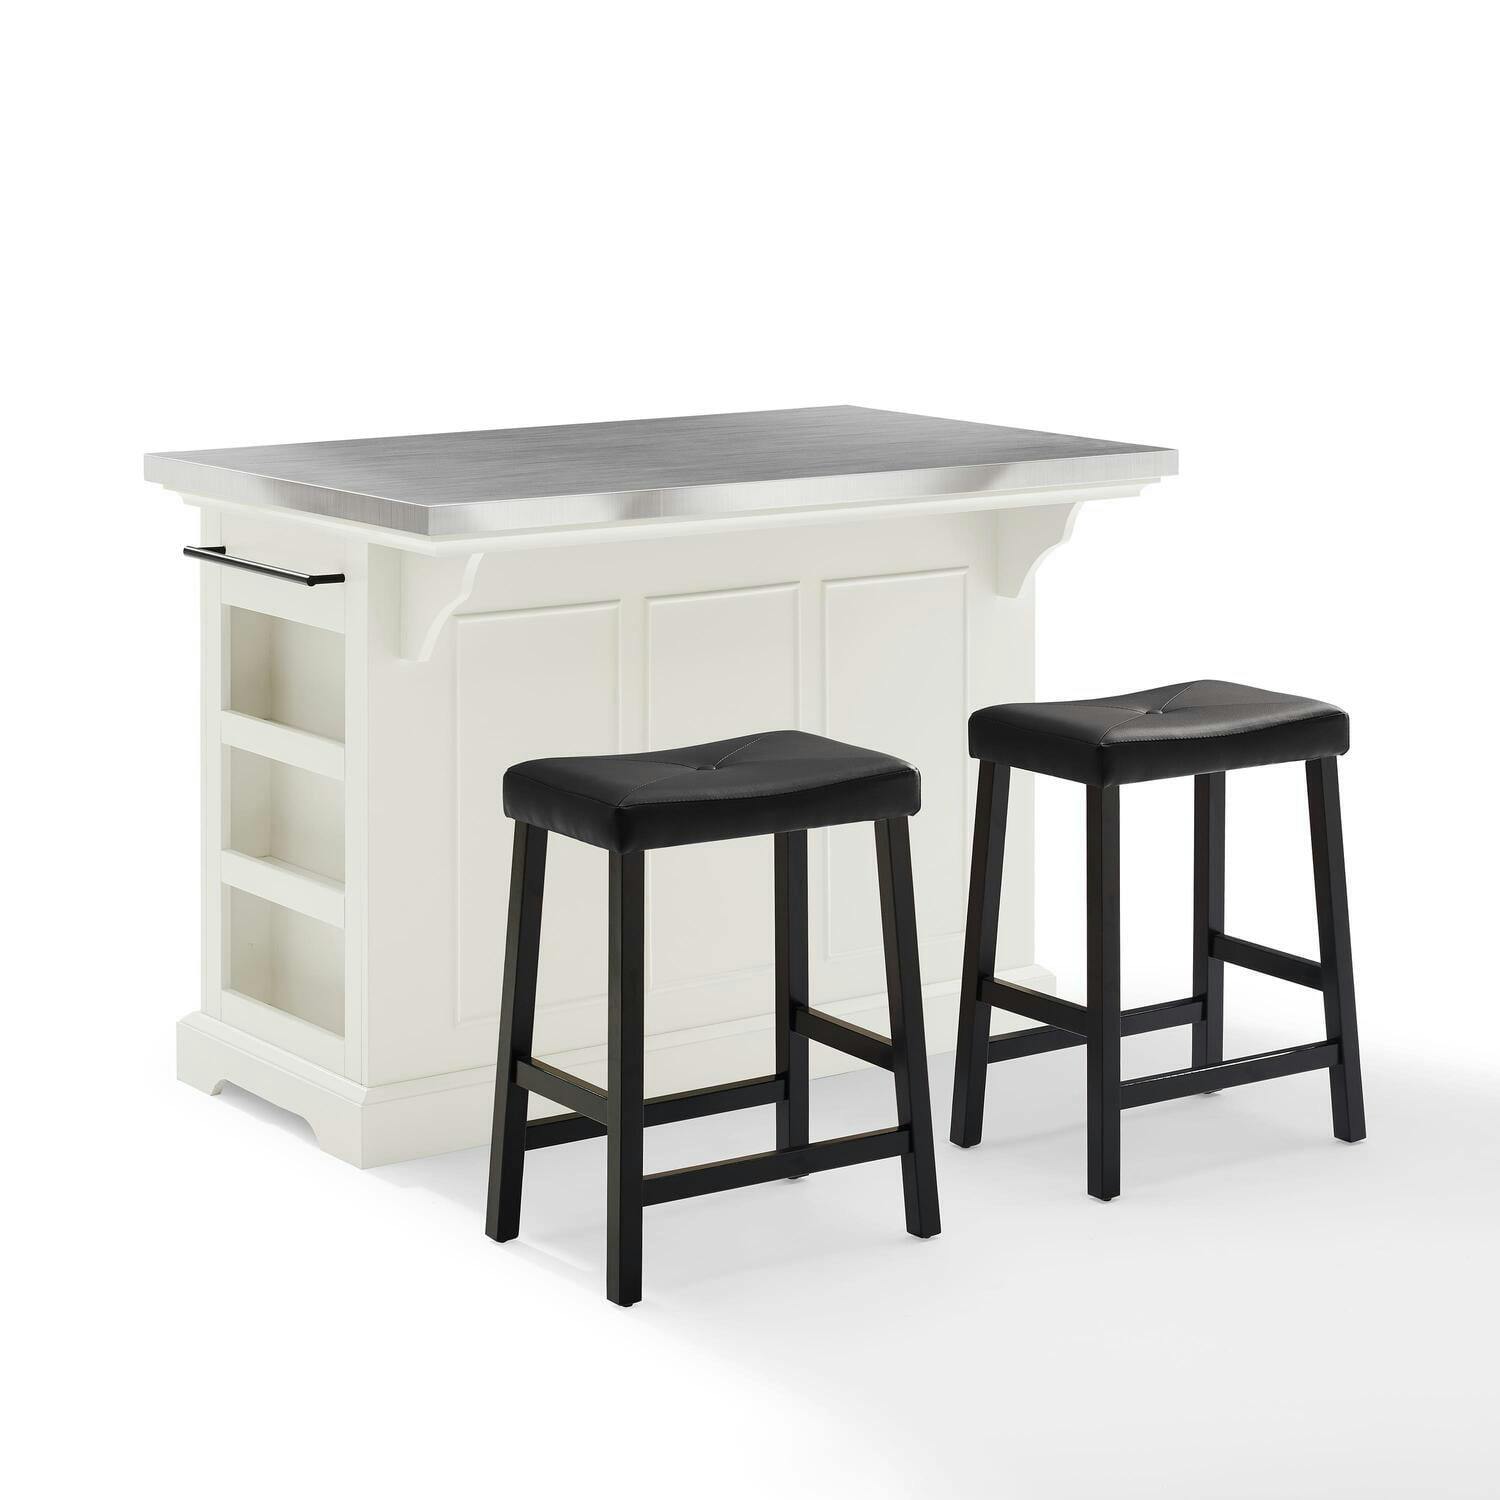 Julia White Stainless Steel Top Kitchen Island with Saddle Stools